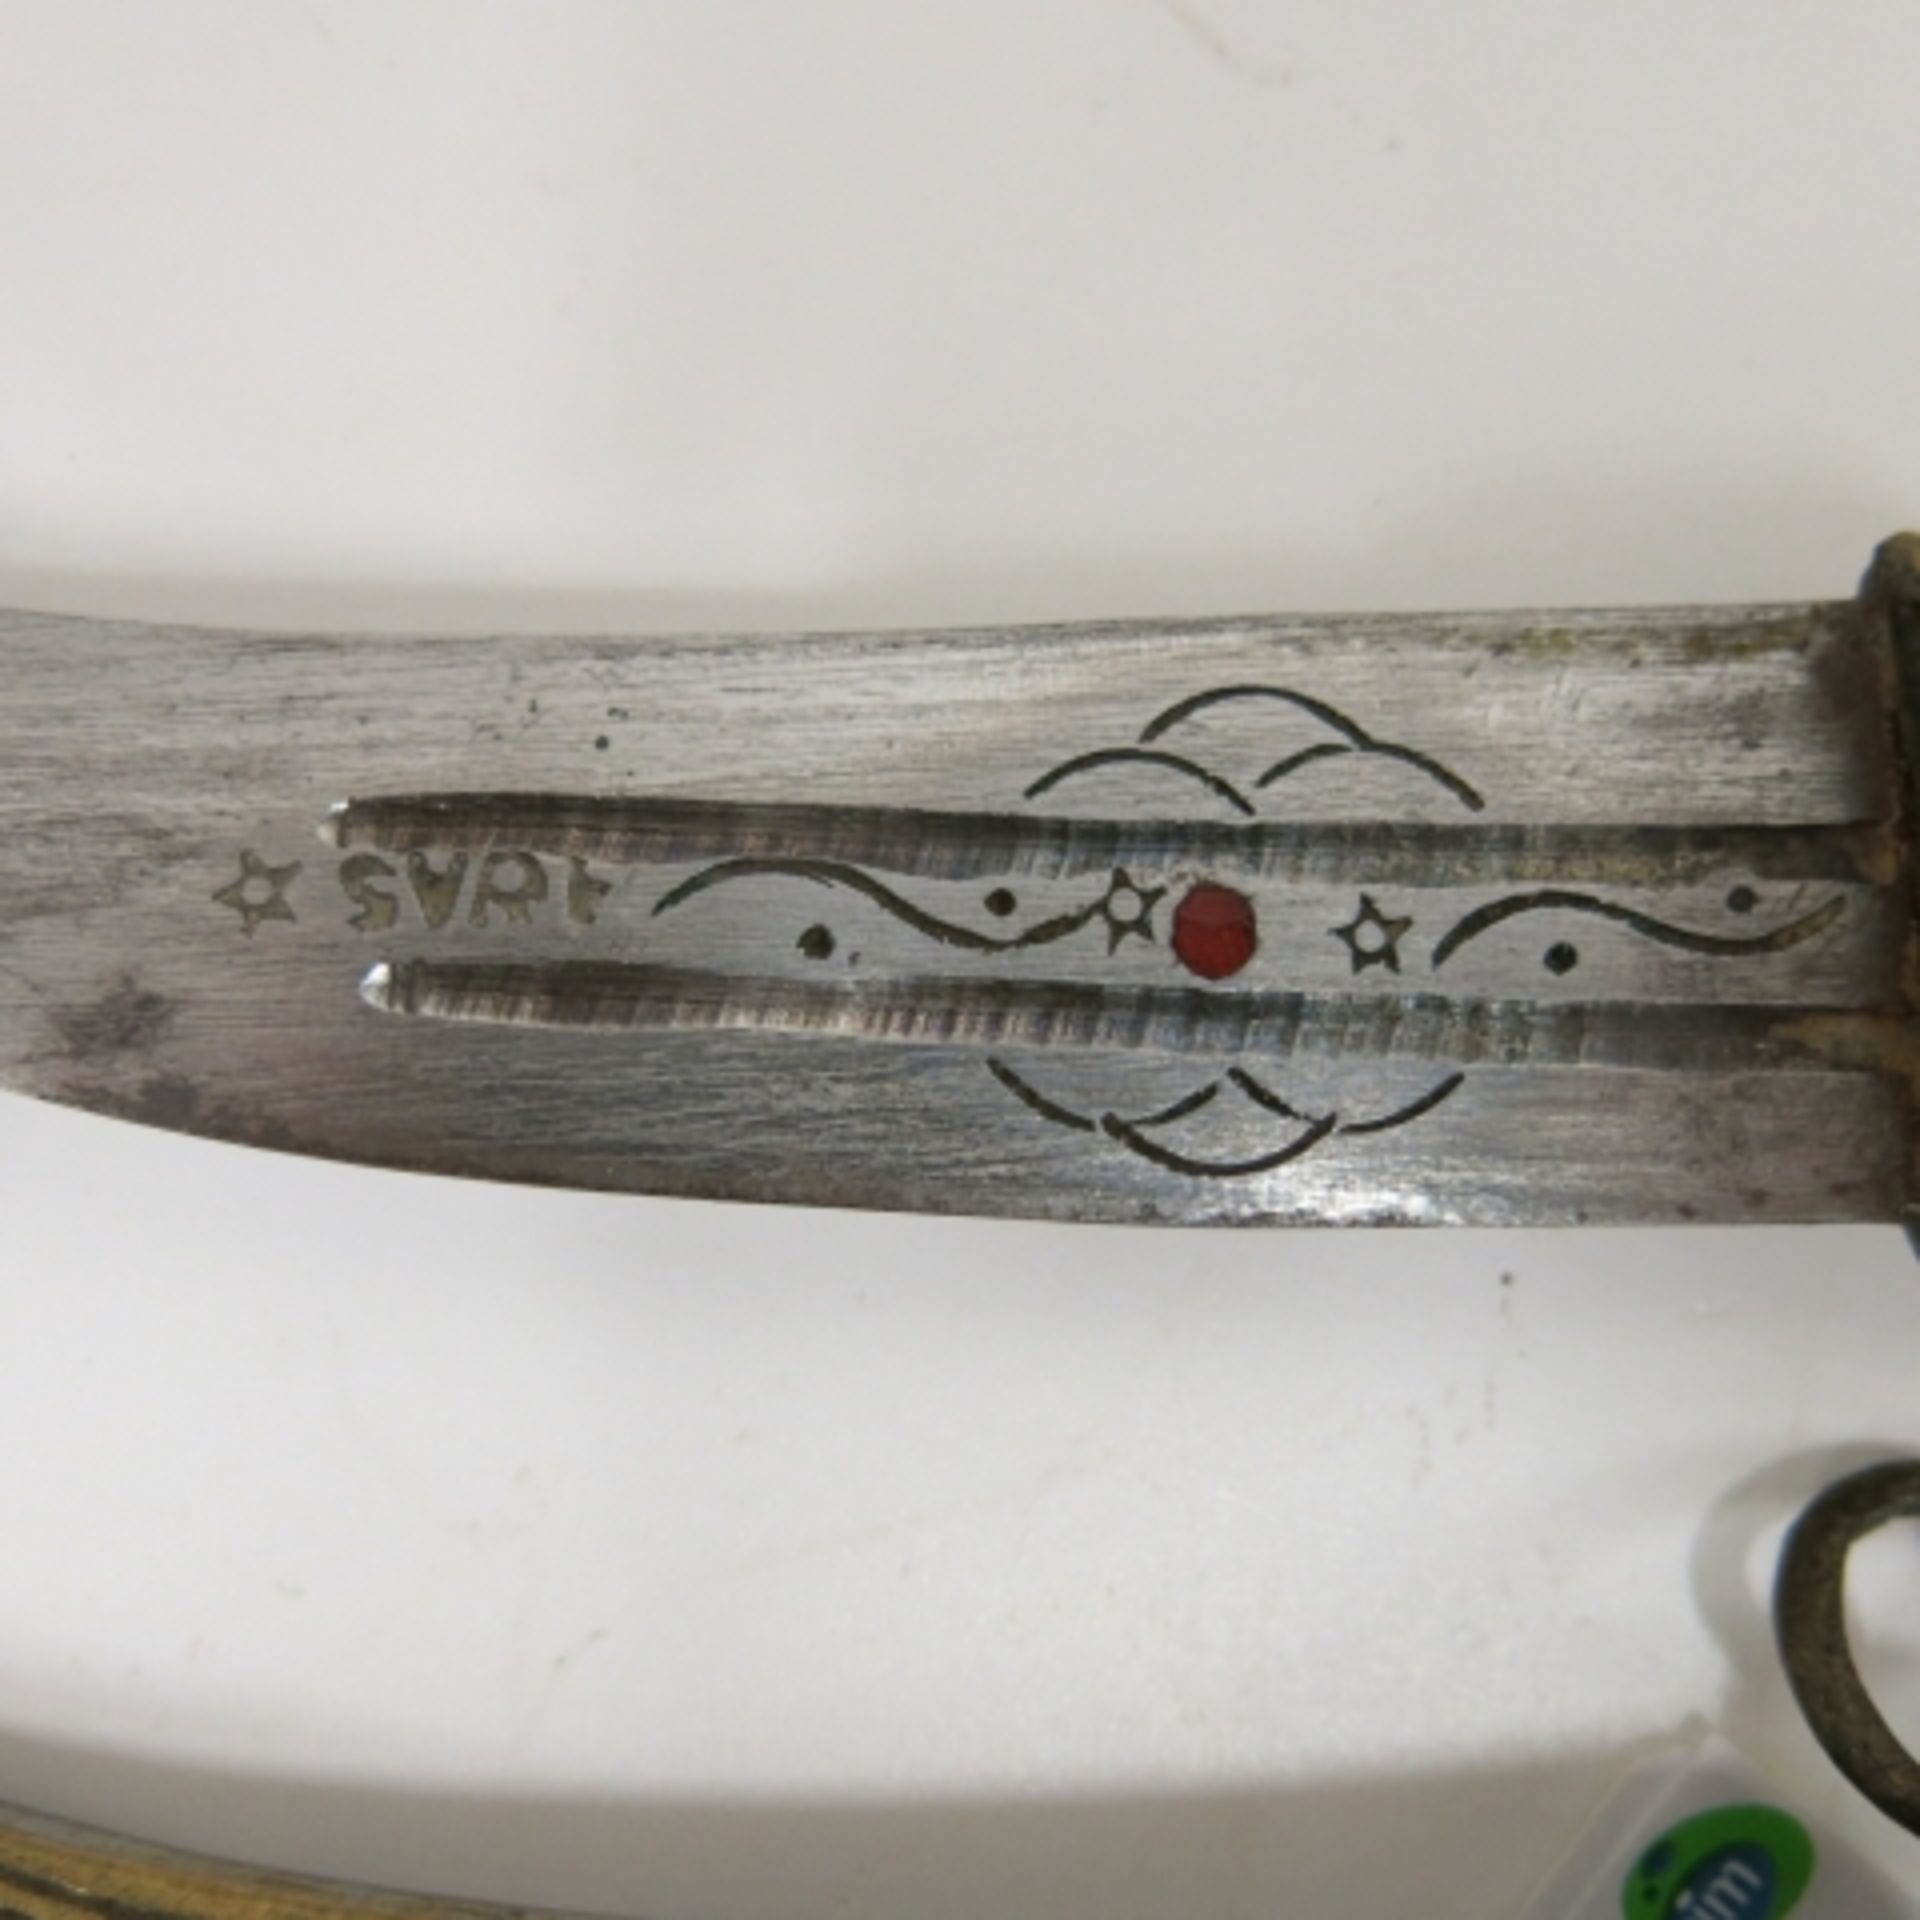 Middle Eastern style curved blade dagger knife with metal sheath together with another similar - Image 4 of 9